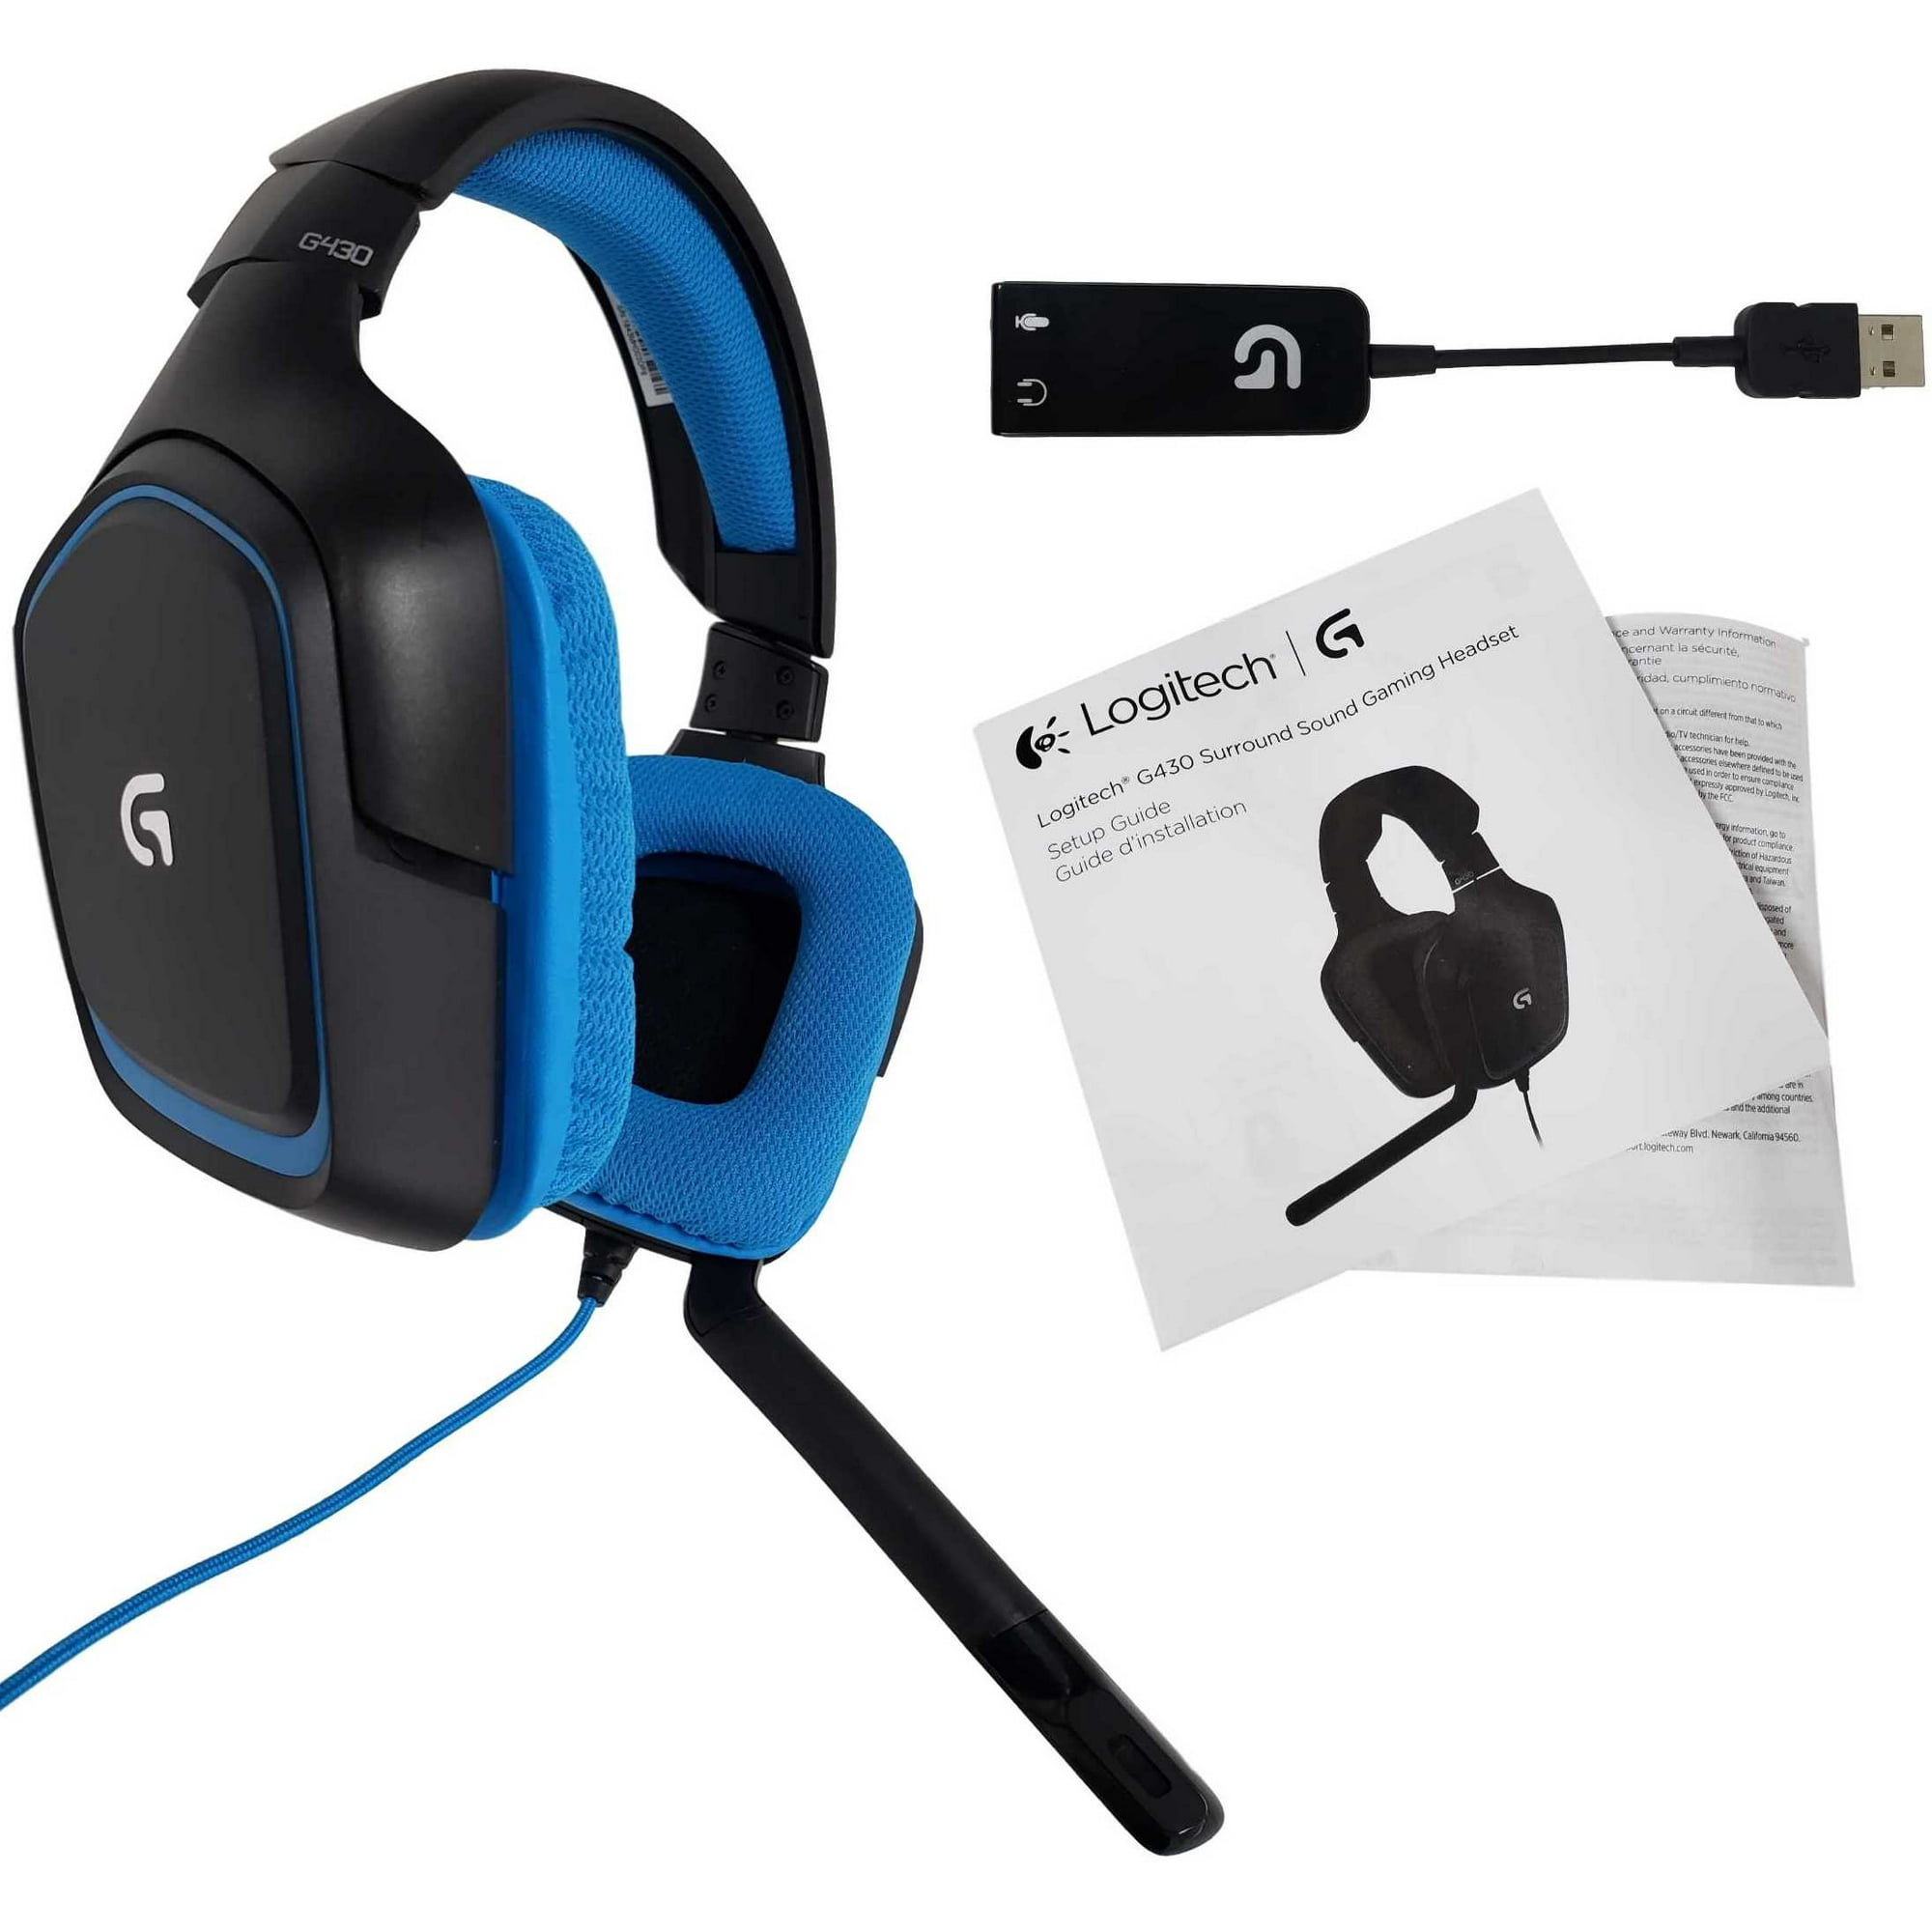 Logitech G430 Stereo Noise-cancelling Wired Gaming Headset For PS3, PS4 (Non-Retail Packaging) | Walmart Canada